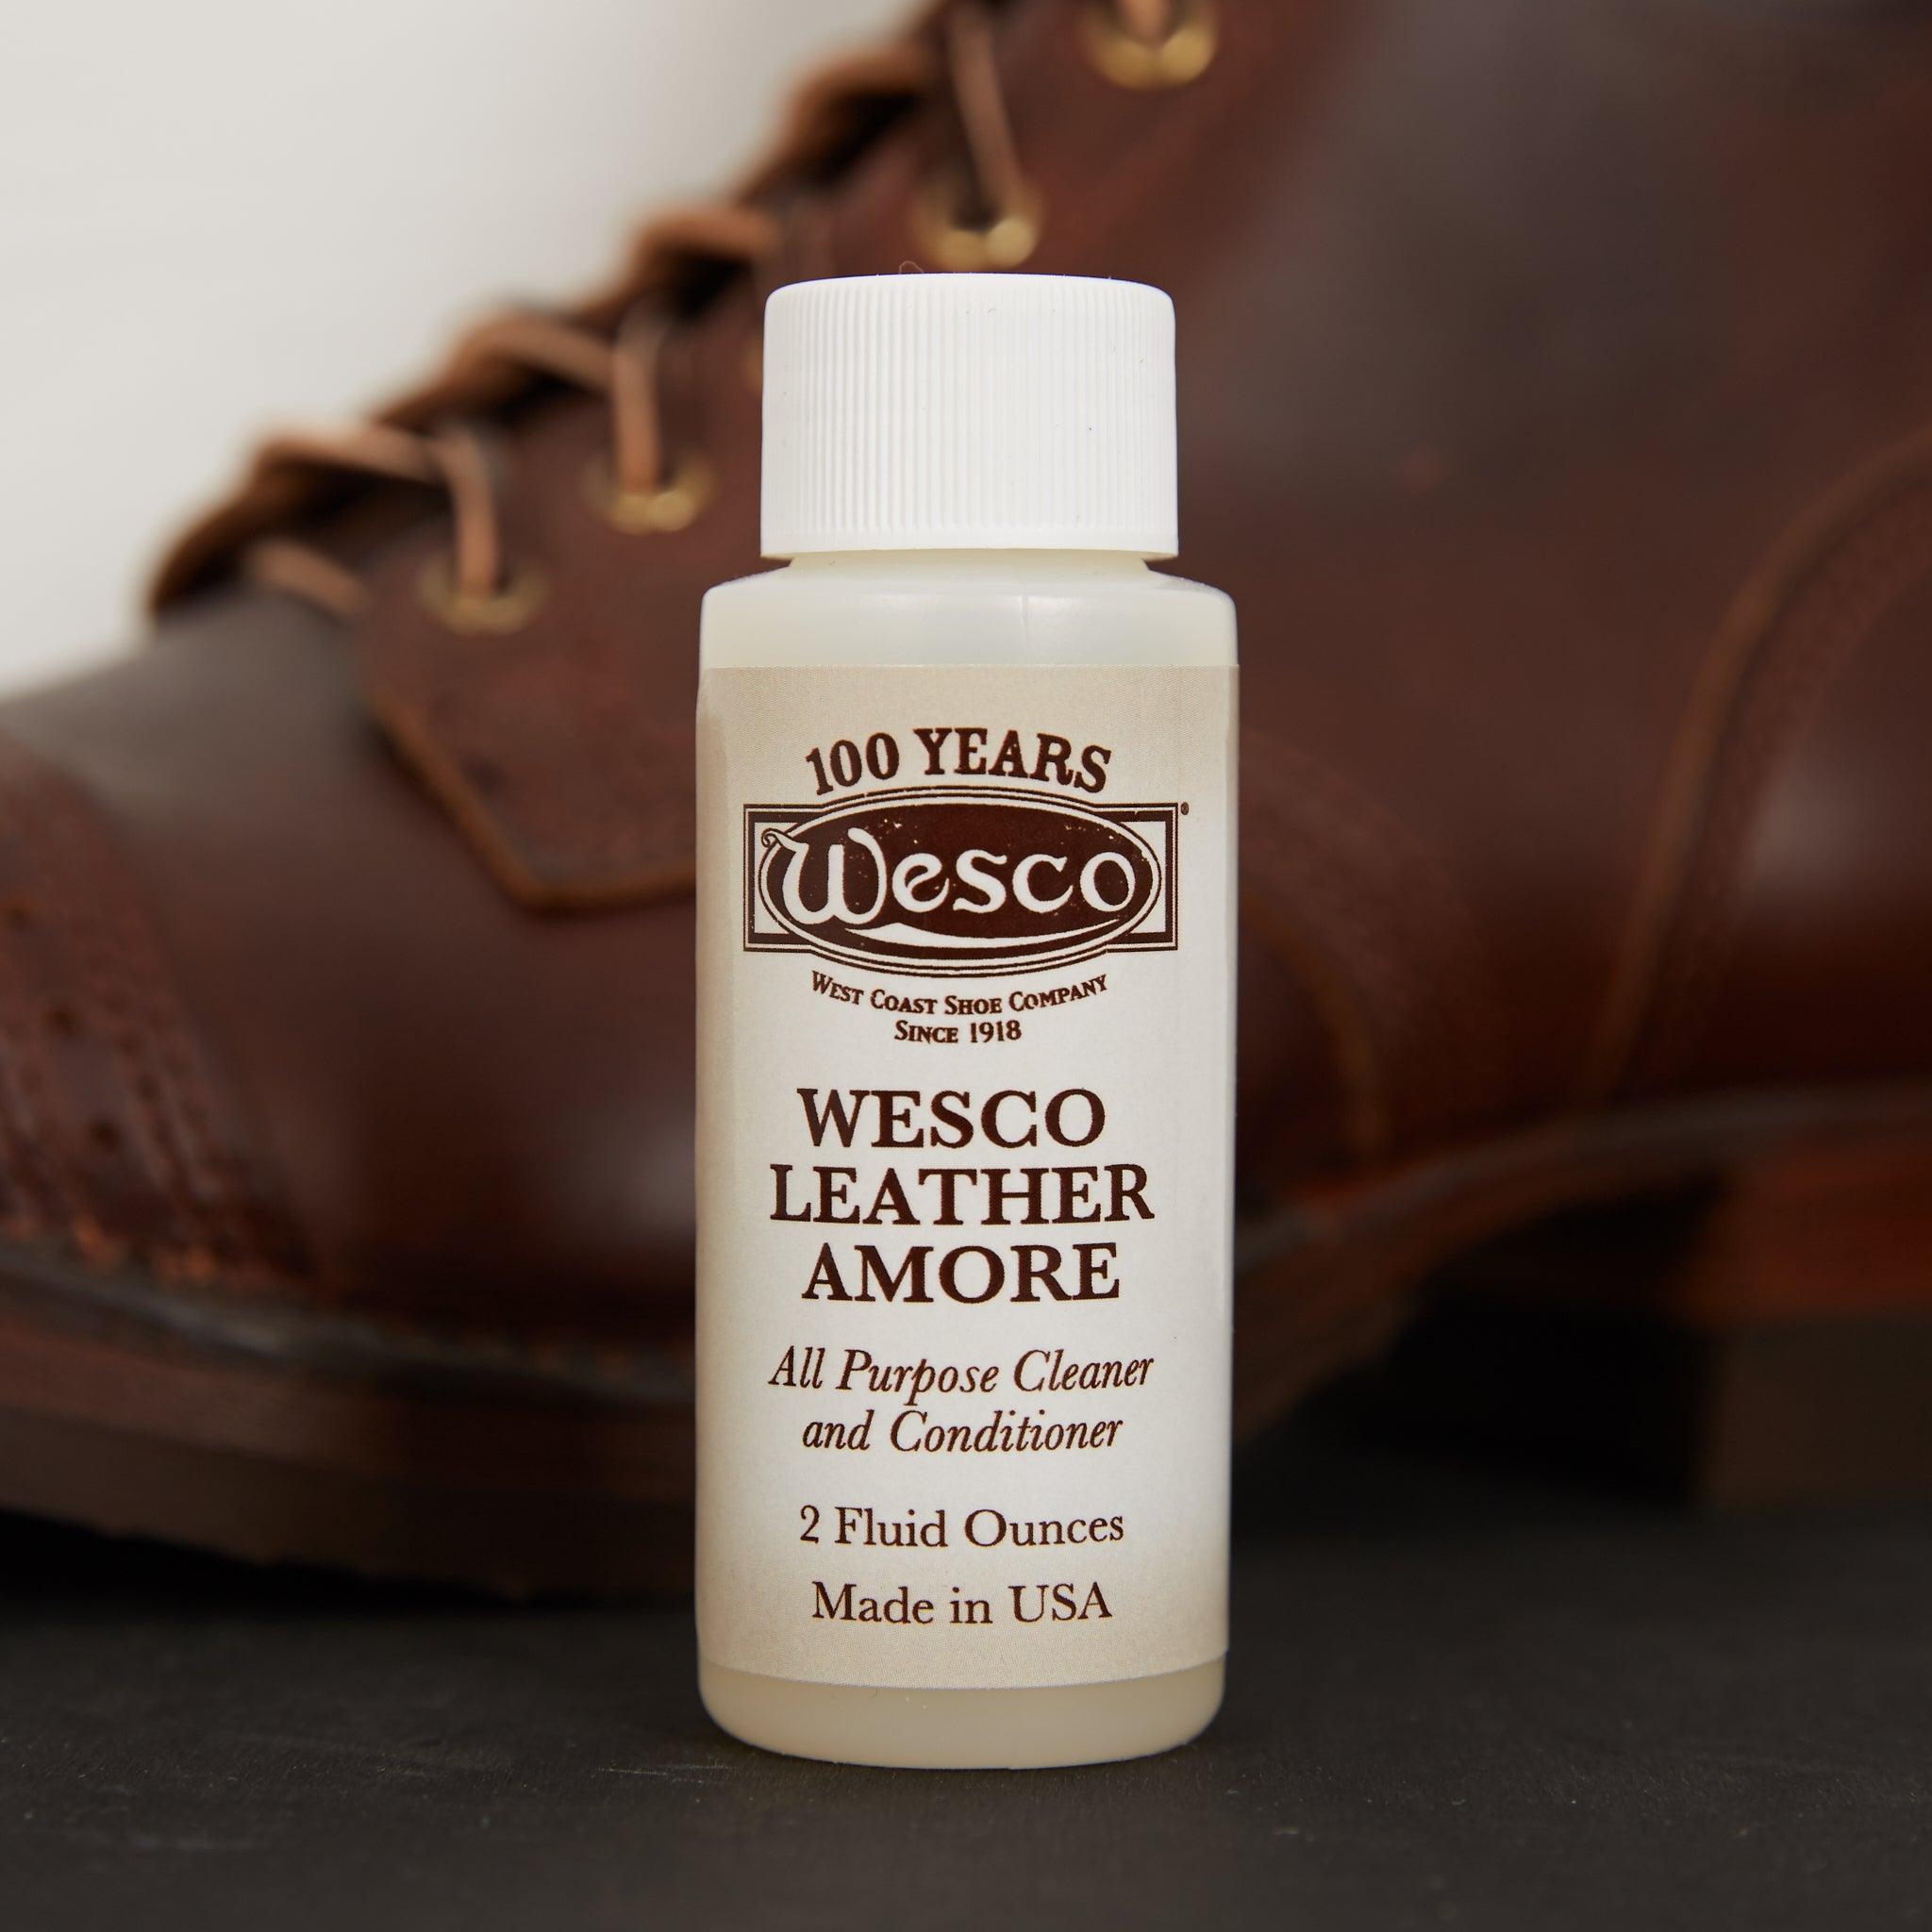 Image showing the Wesco Leather Boot Dressing Leather Amore which is a Shoecare described by the following info Footwear, Shoecare, Wesco and sold on the IRON HEART GERMANY online store